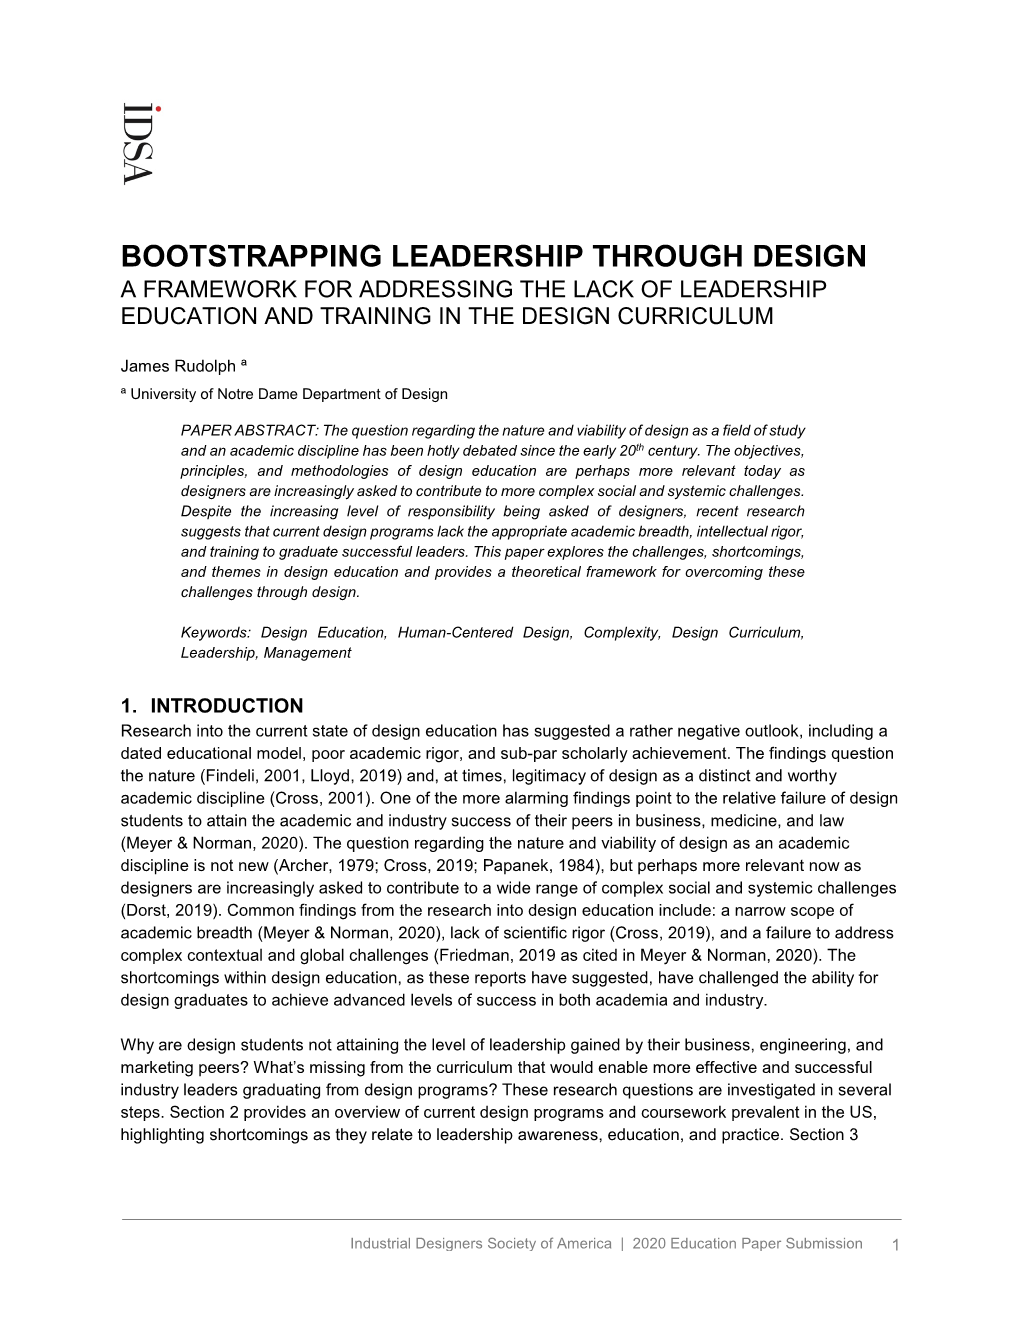 Bootstrapping Leadership Through Design by James Rudolph.Pdf